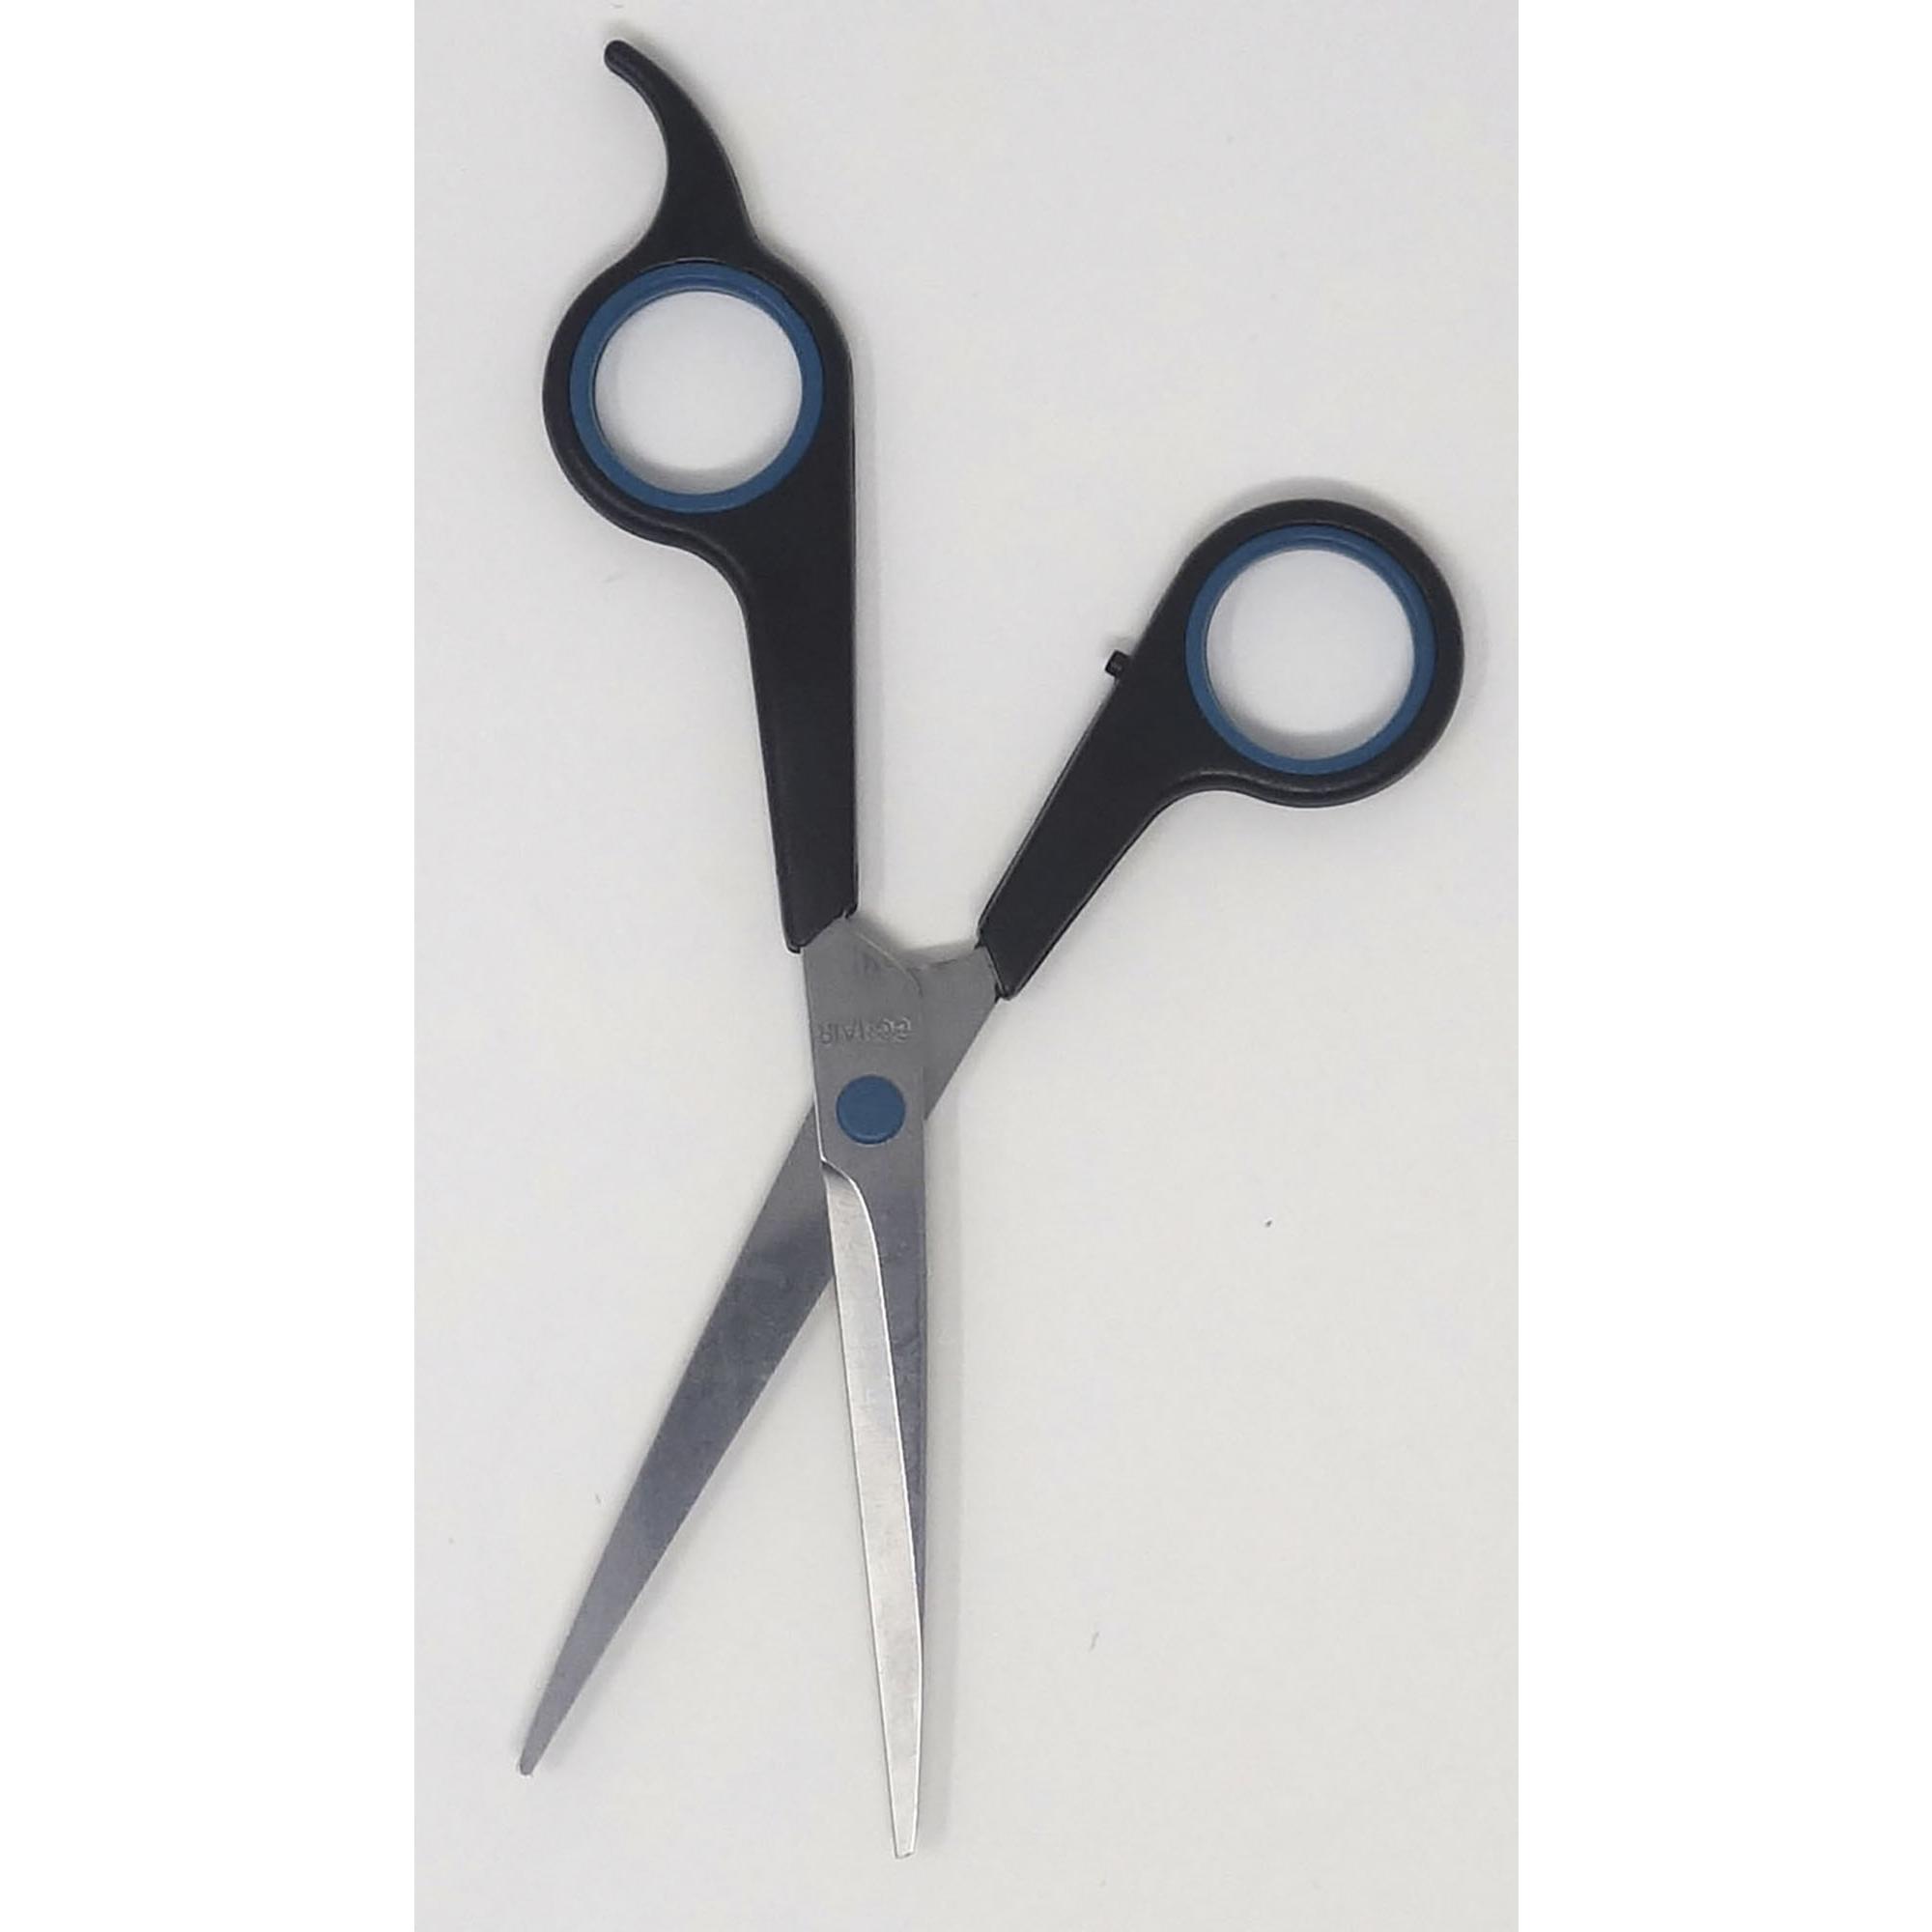 Conair Styling - 5-1/2" Diamond Sharpened Shears and Comb - image 2 of 4